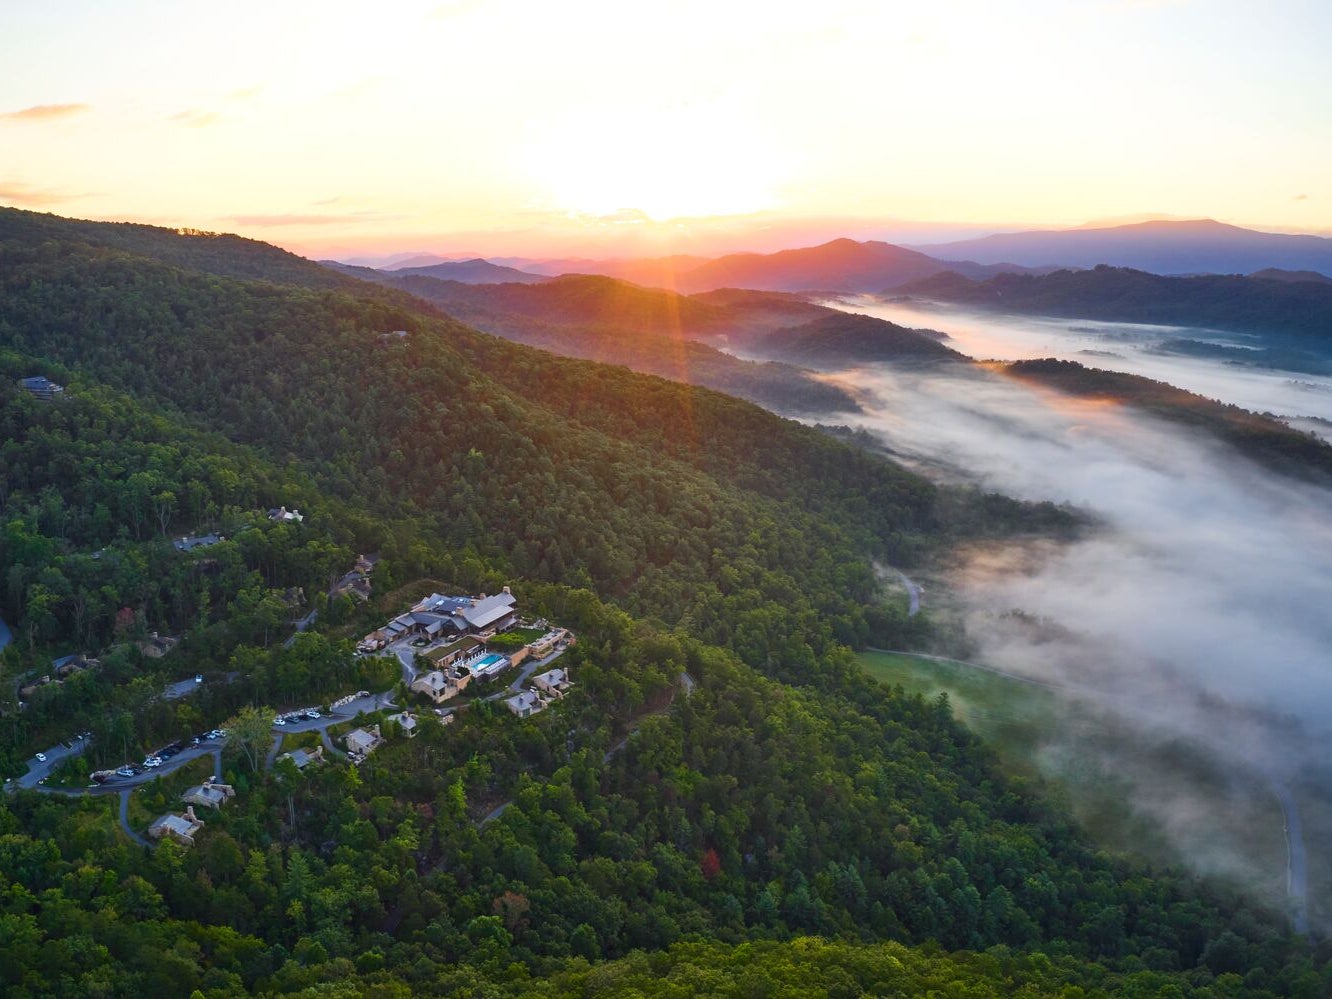 Blackberry Mountain resort is nestled in Tennessee’s Great Smoky Mountains